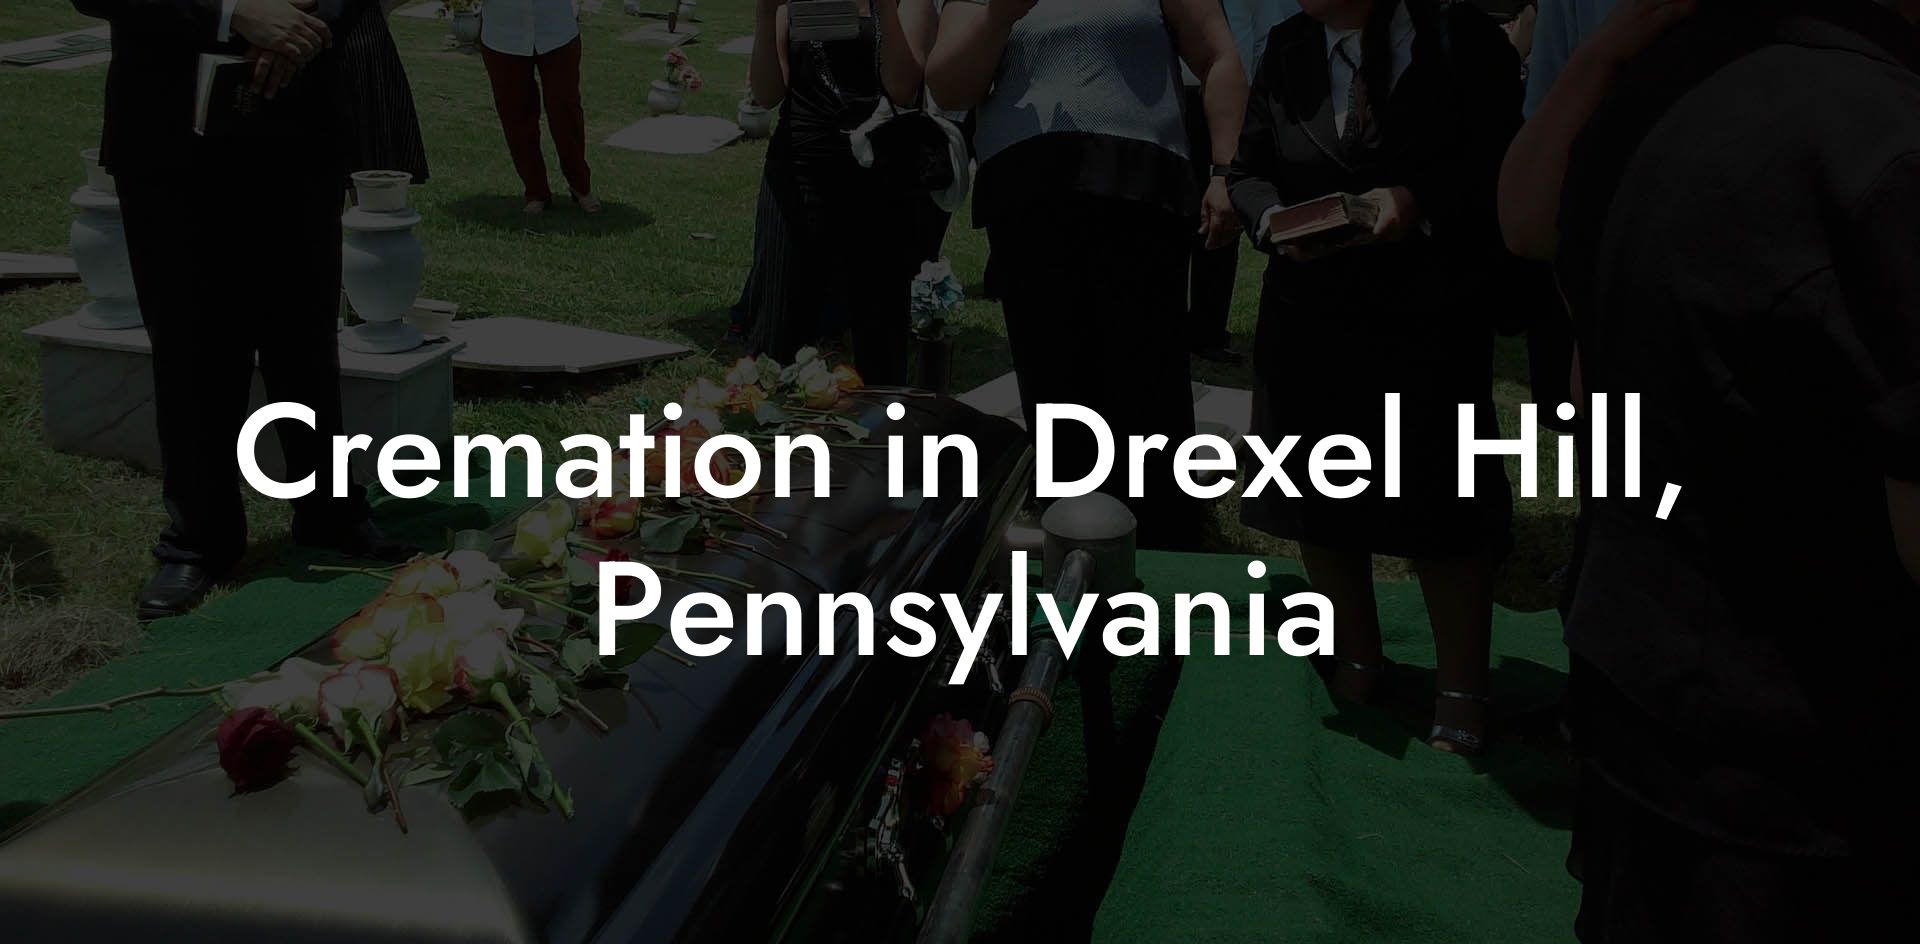 Cremation in Drexel Hill, Pennsylvania